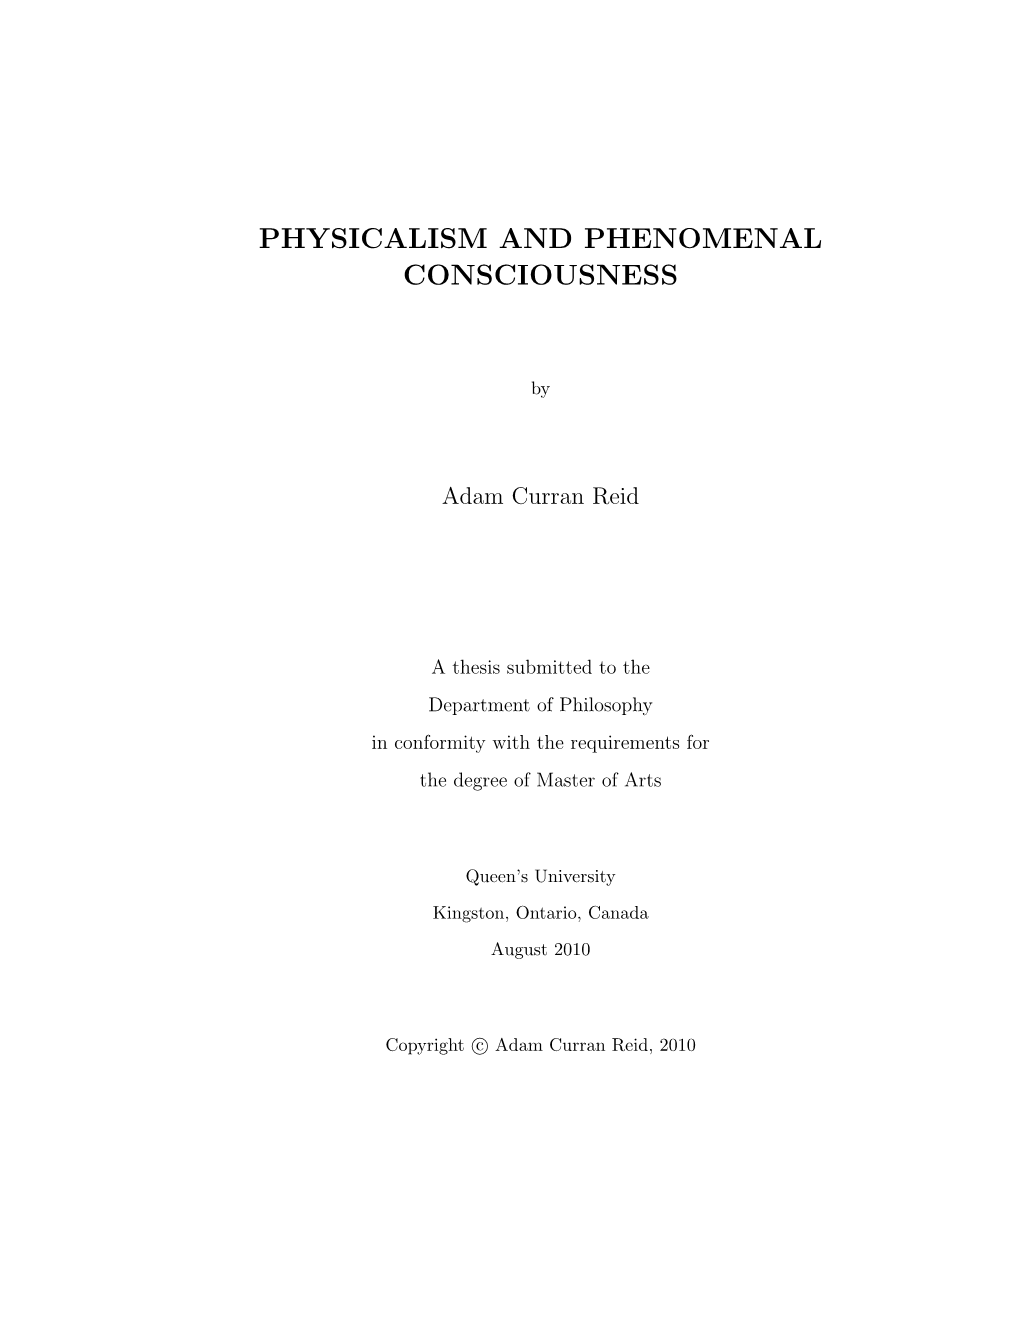 Physicalism and Phenomenal Consciousness